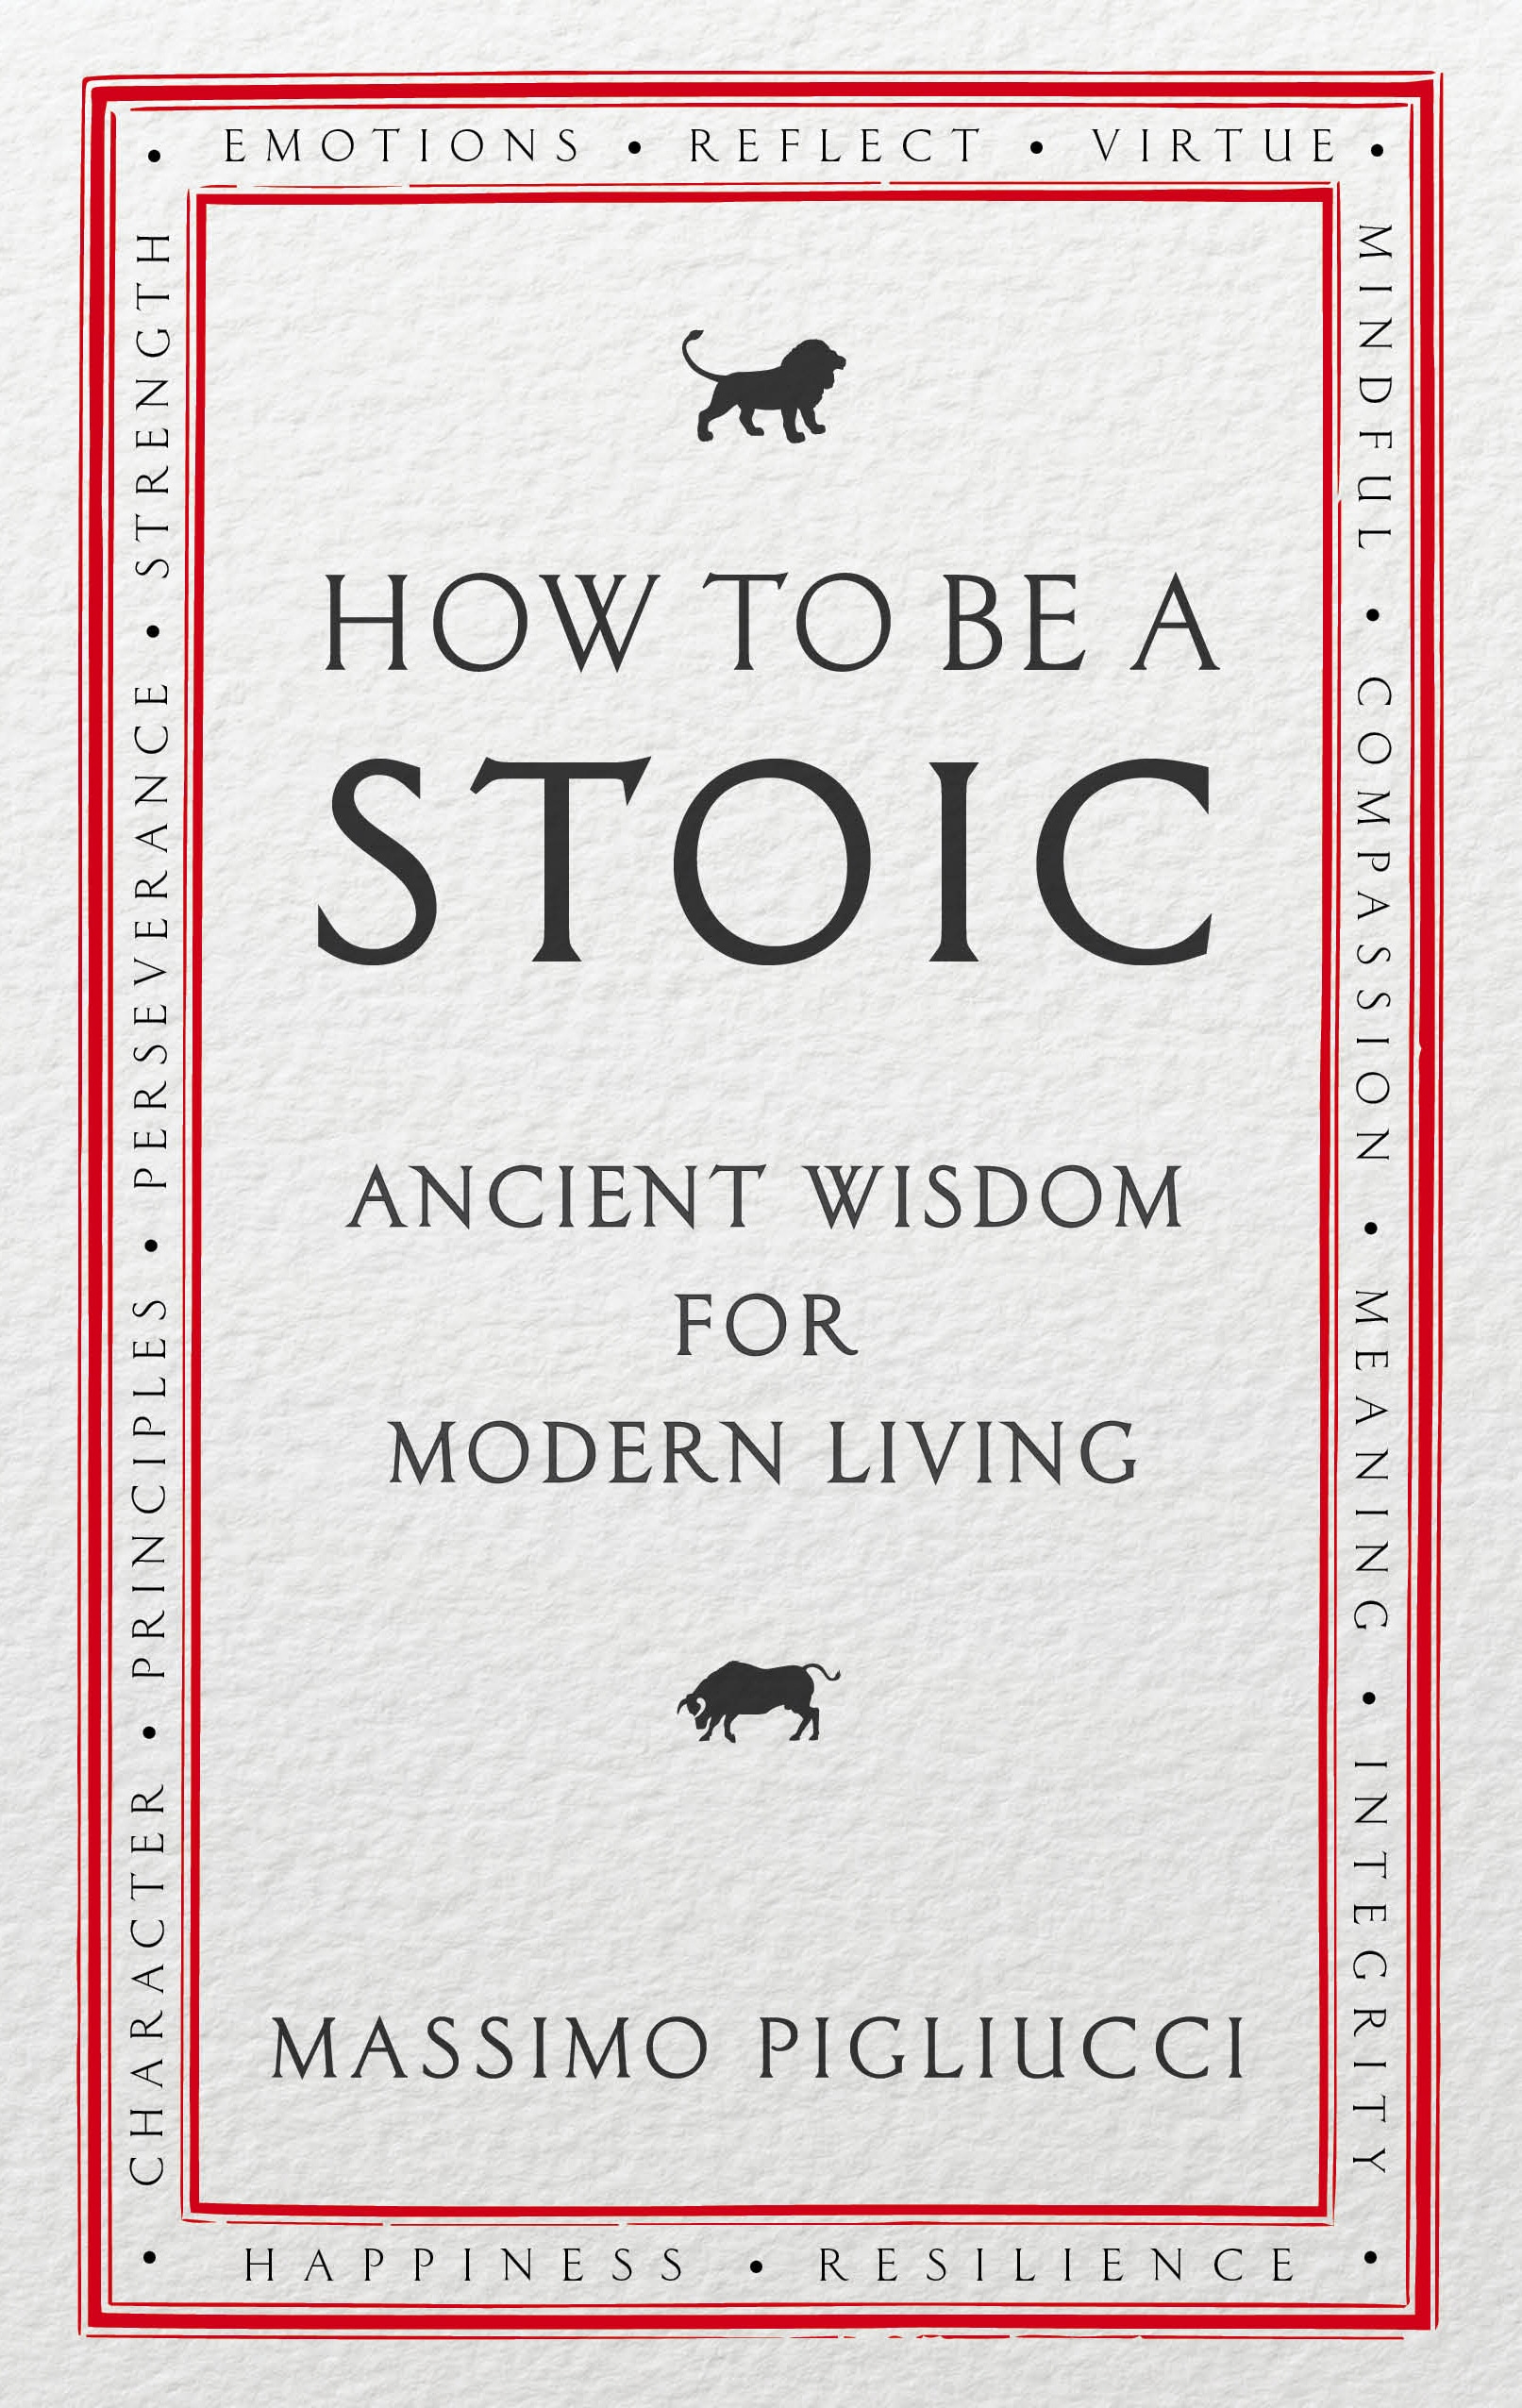 Book “How To Be A Stoic” by Massimo Pigliucci — January 7, 2021